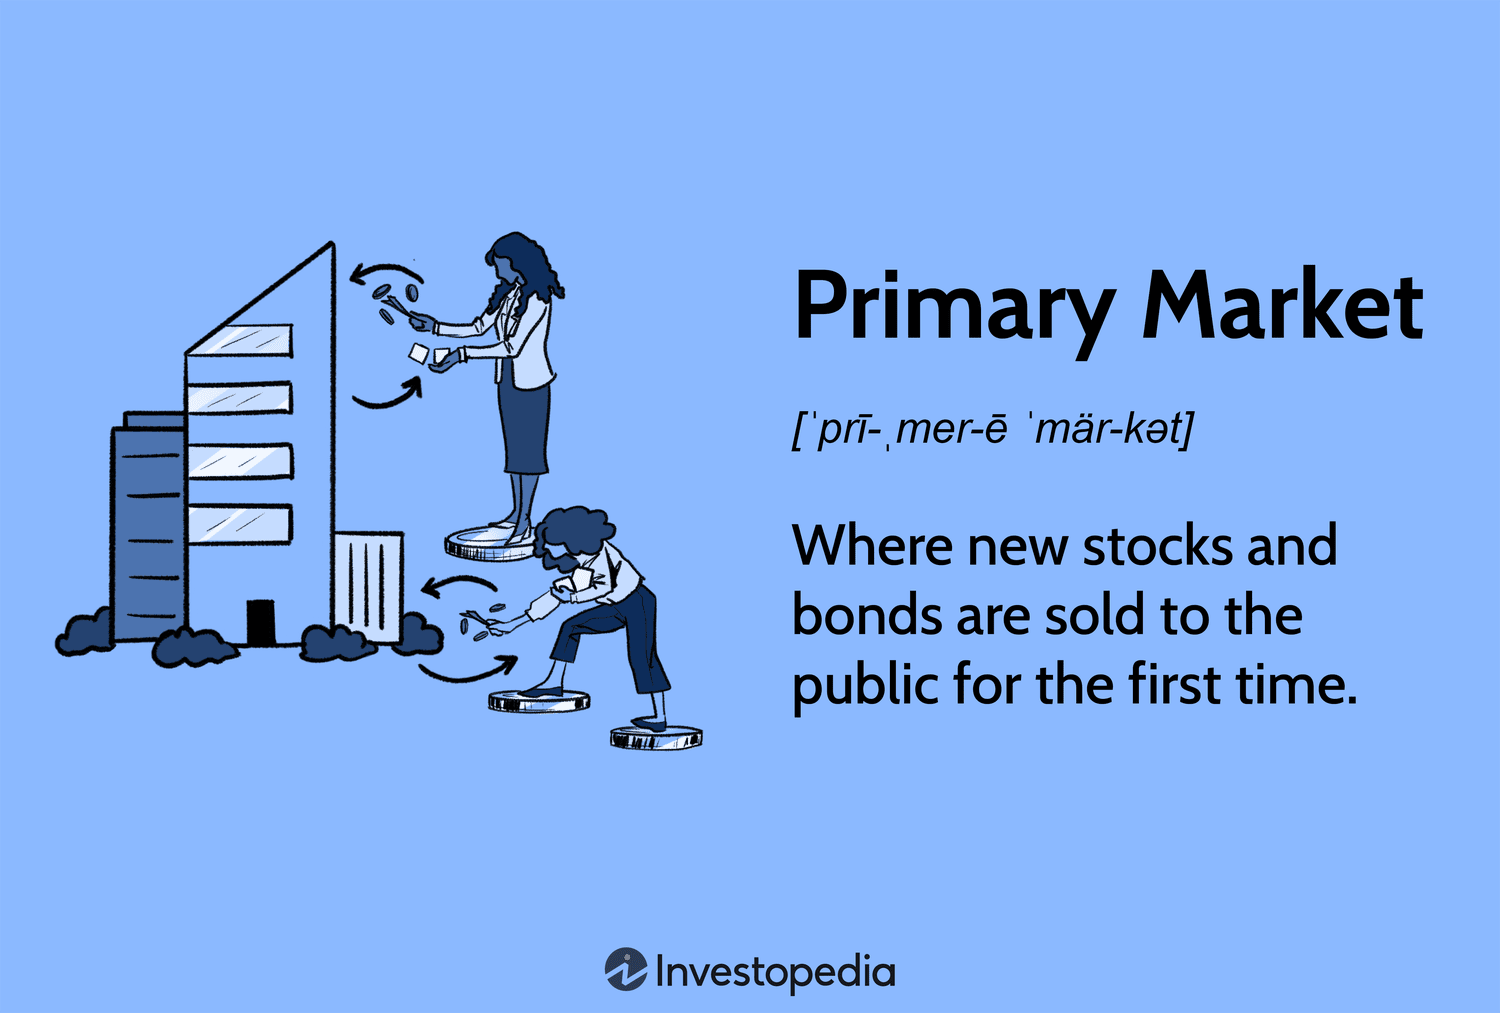 Primary Market: Meaning, Objective, Function & Example